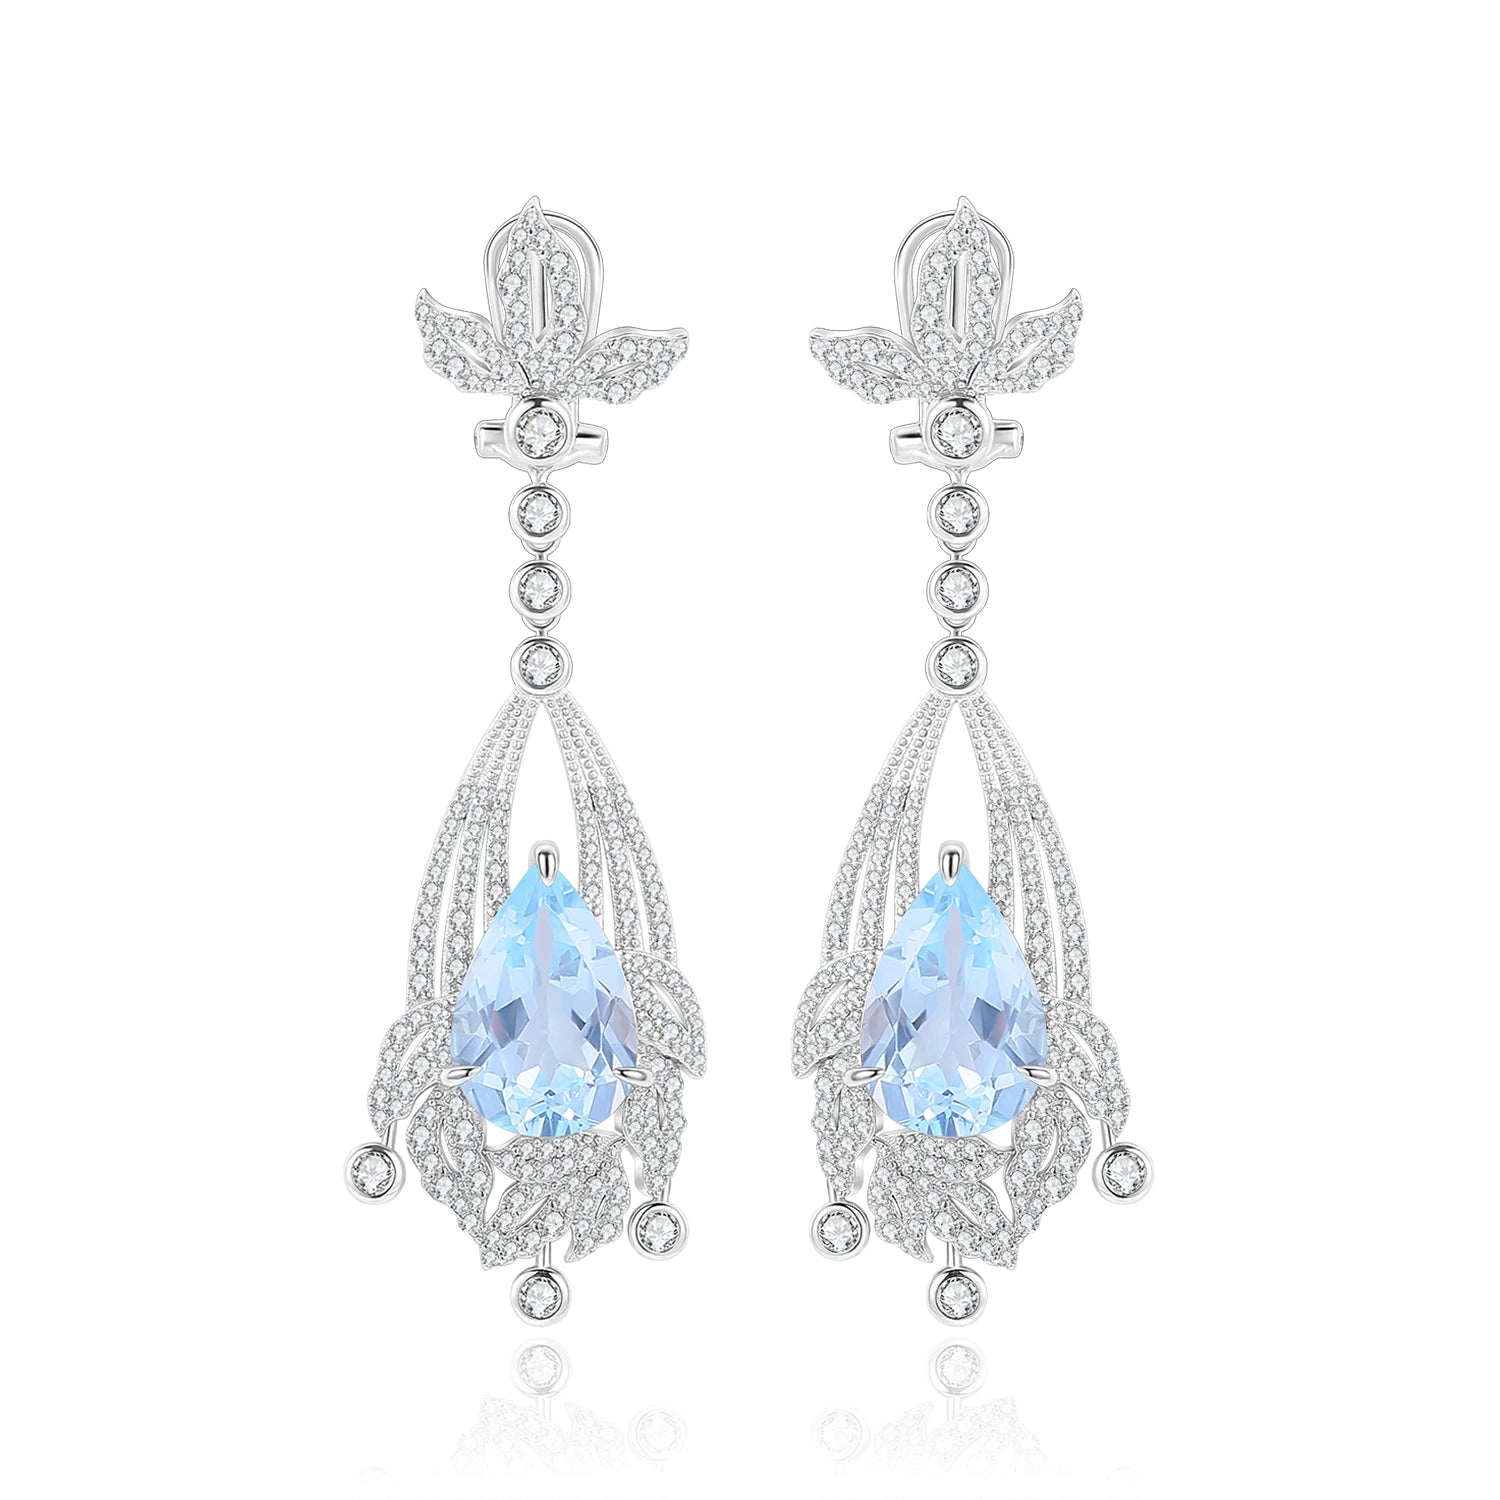 GEM'S BALLET Natural Amethyst Statement Earrings in 925 Sterling Silver Chandelier Earrings Luxury Bridal Jewelry Gift For Her Sky Blue Topaz 925 Sterling Silver CHINA